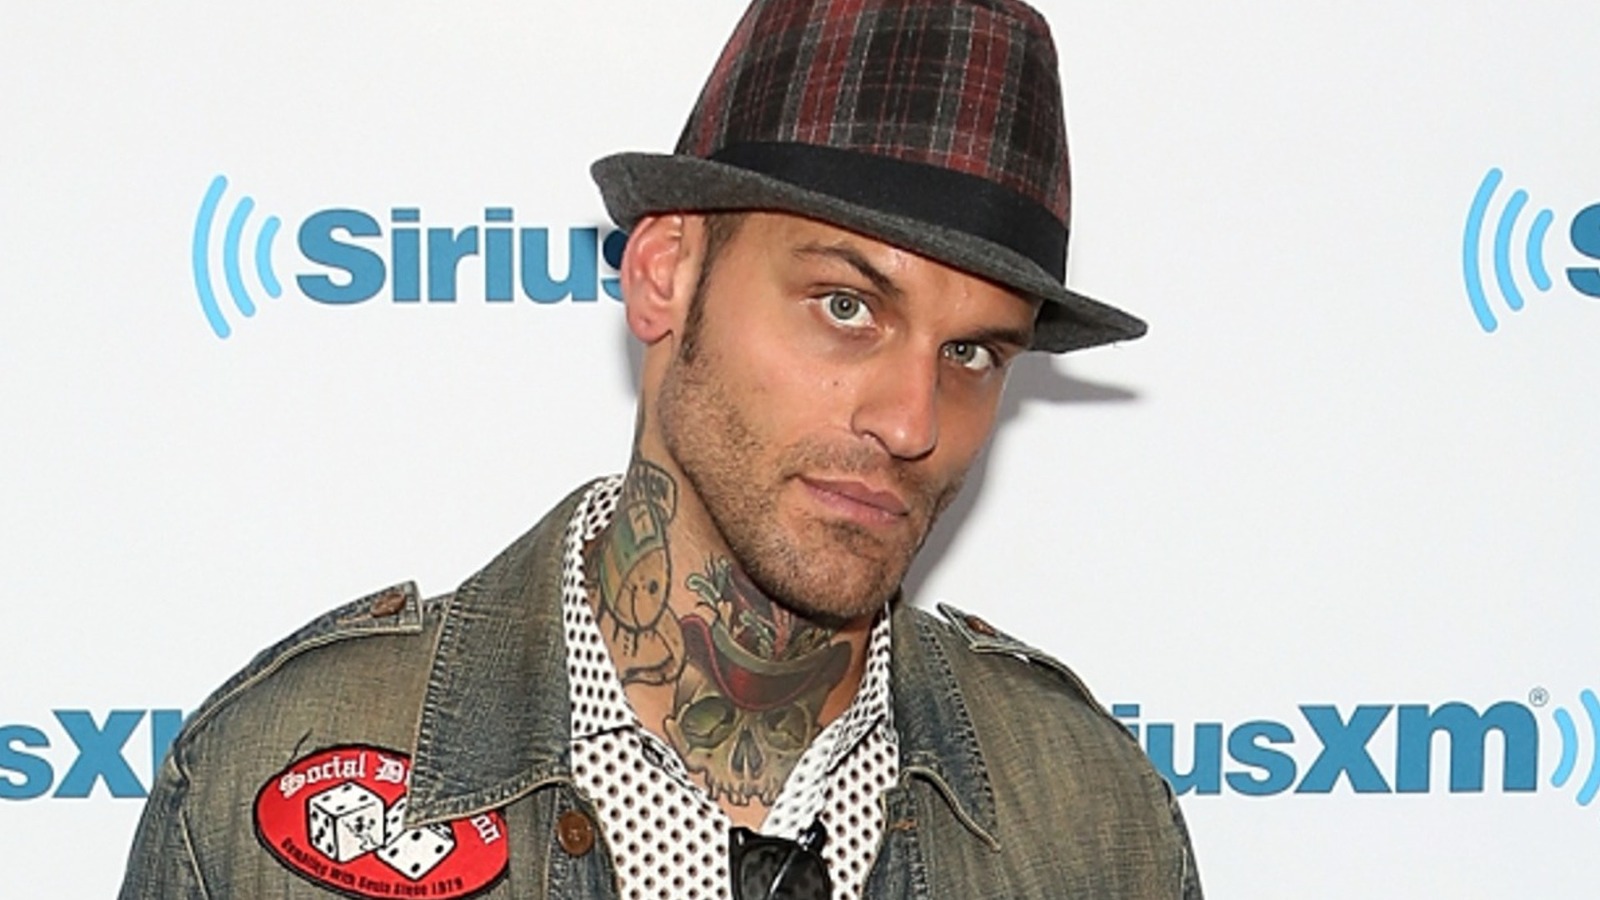 It's winter, so if you're bored and hanging with Corey Graves, bring your  tattoo needle! - Cageside Seats